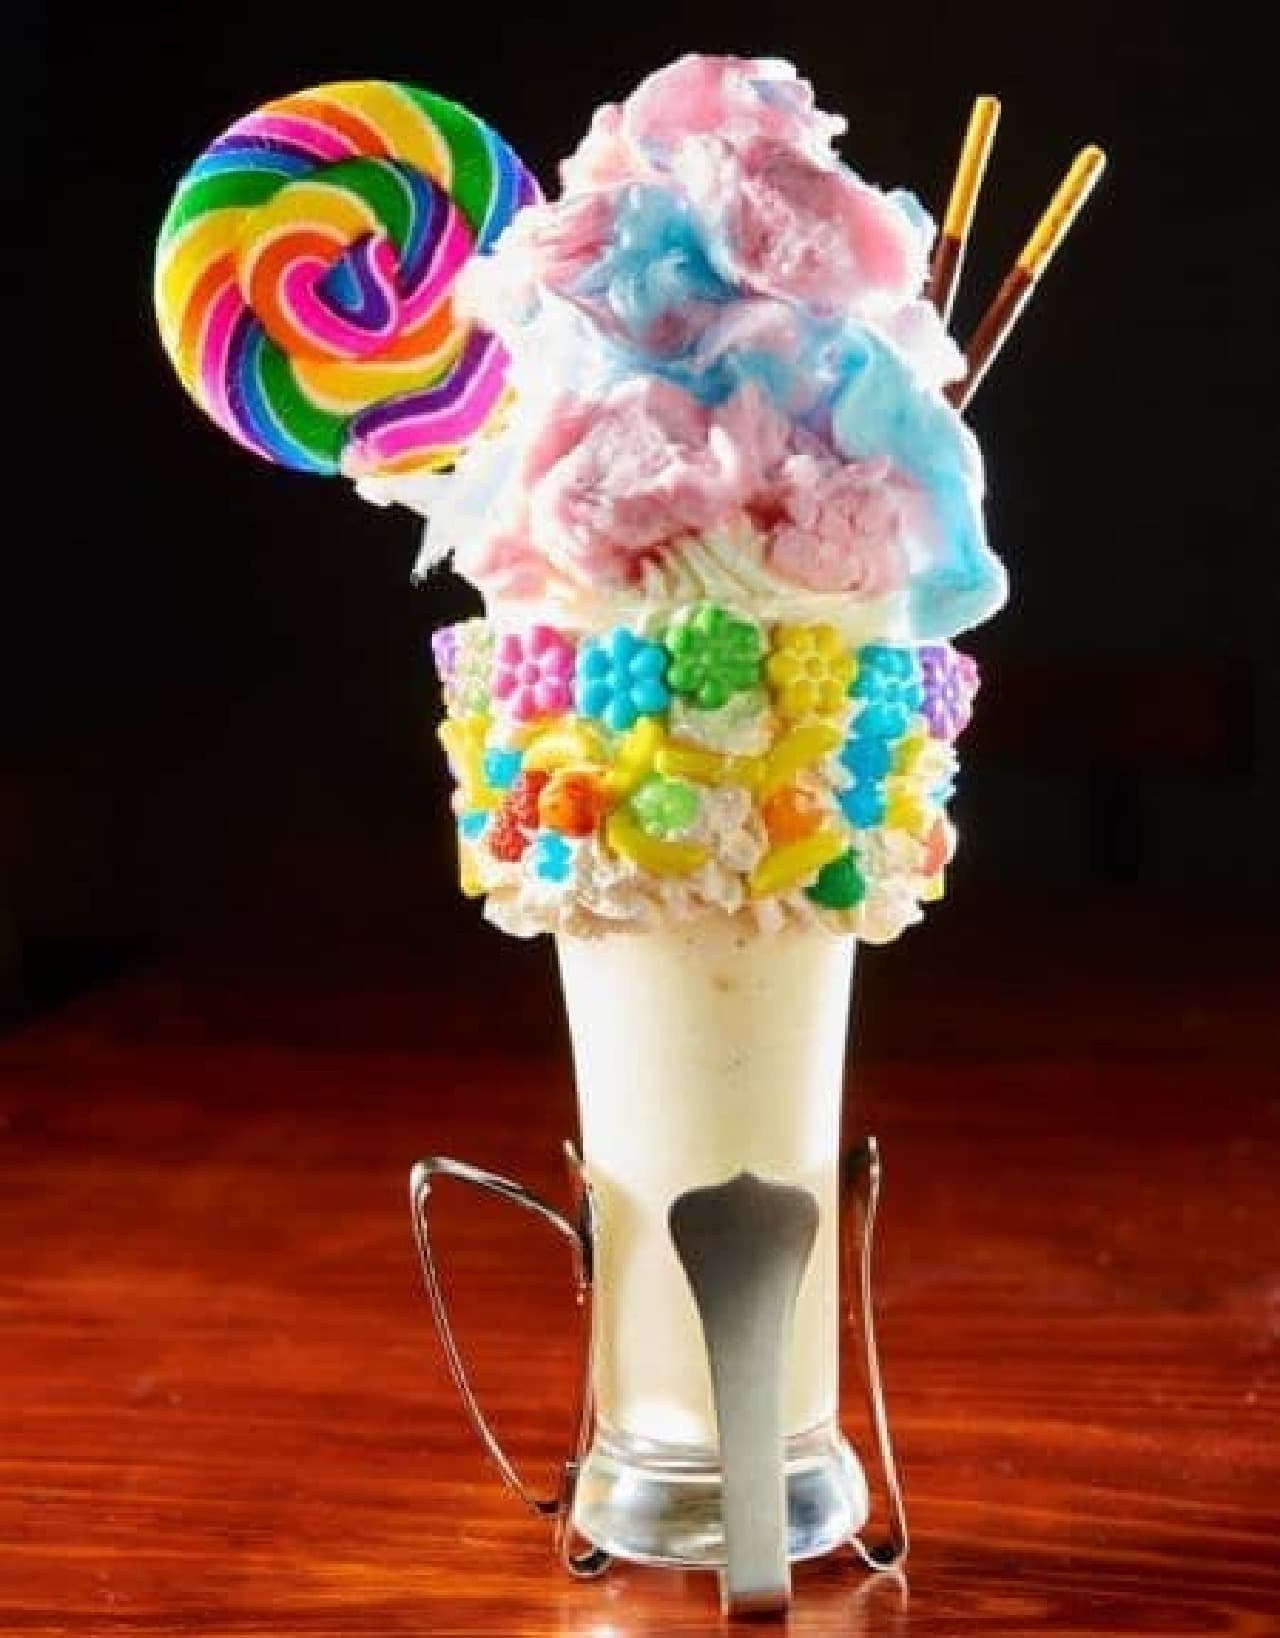 Crazy shake is a drink that is characterized by the deliciousness of the shake alone, as well as toppings such as candies and cookies.